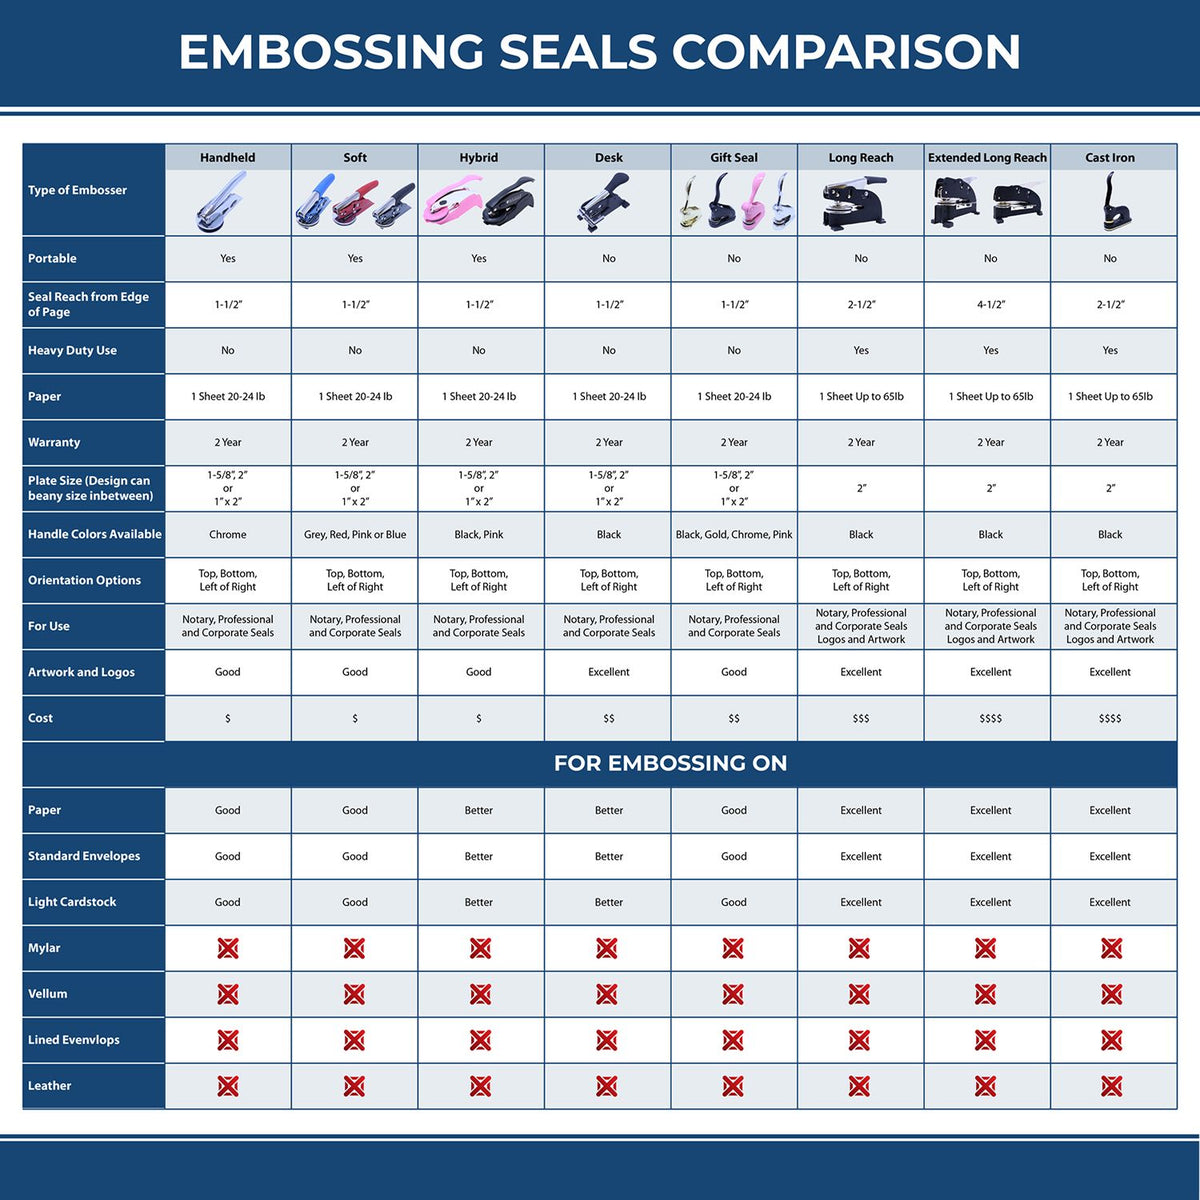 A comparison chart for the different types of mount models available for the Hybrid Virginia Geologist Seal